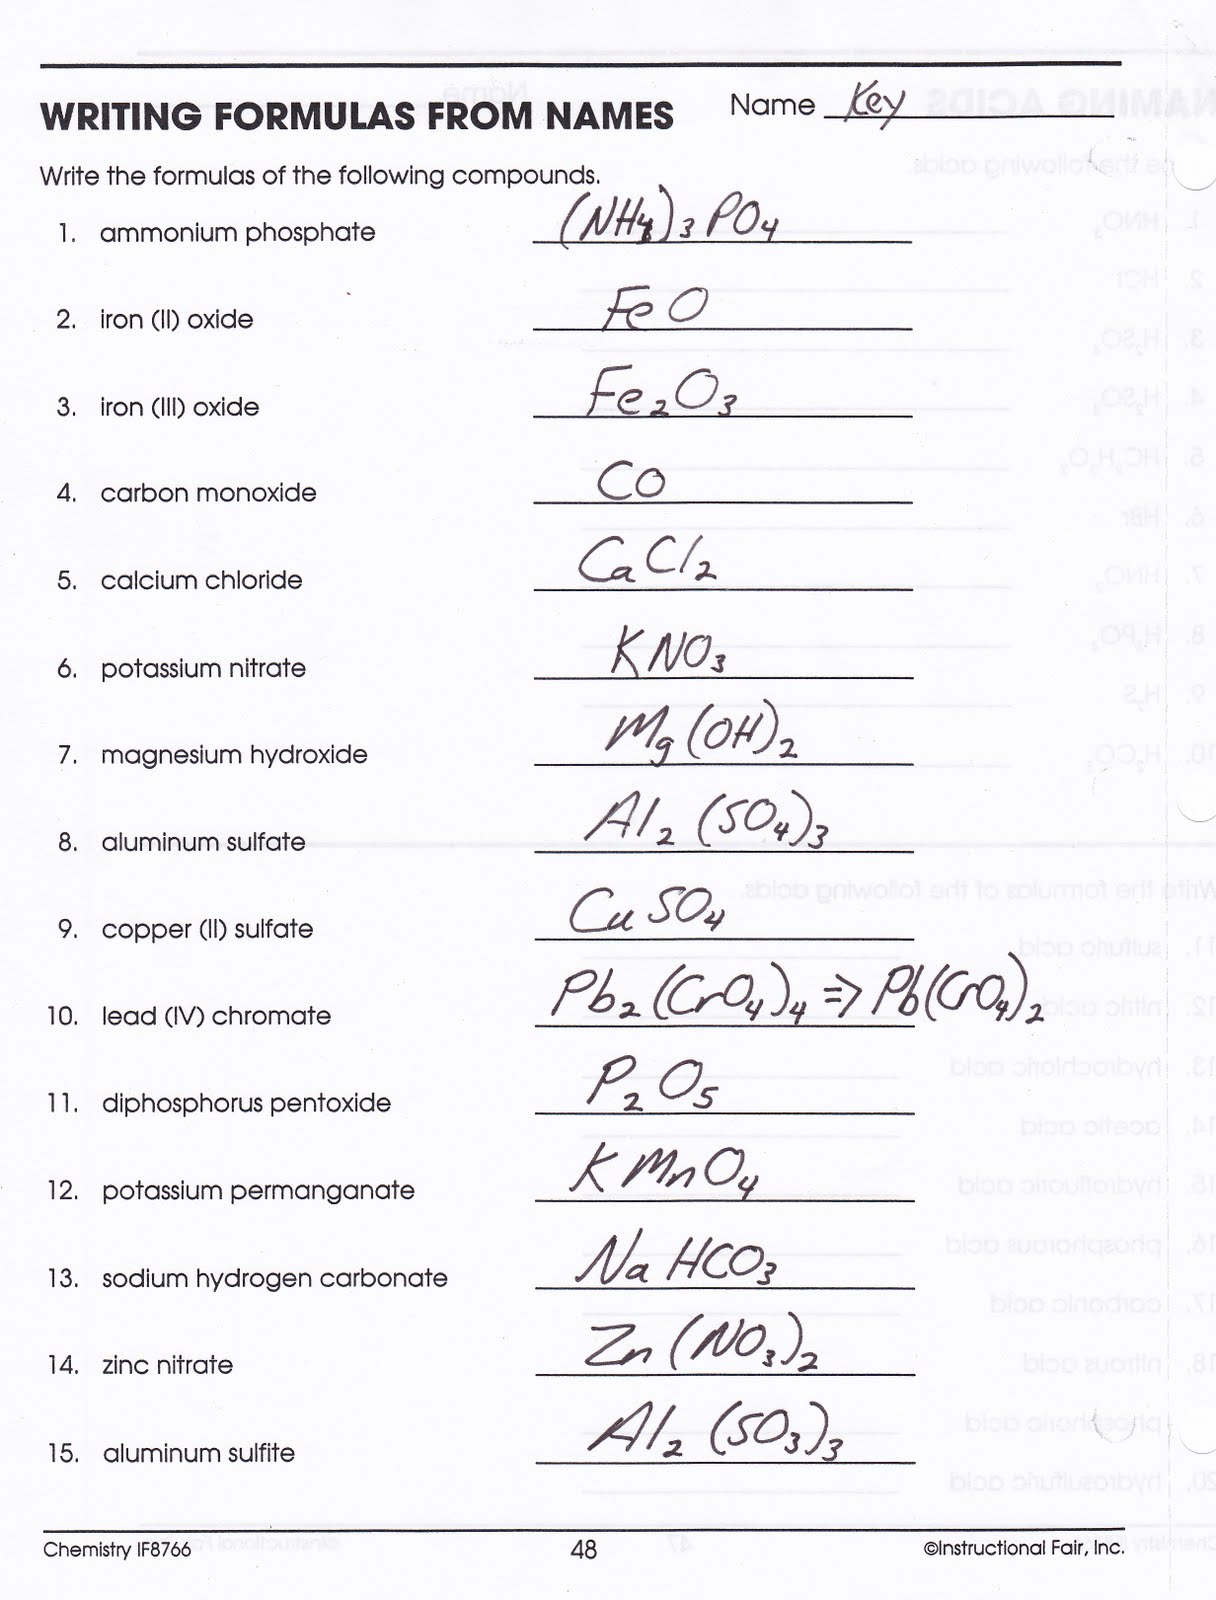 heritage-high-school-chemistry-2010-11-writing-compound-names-and-formulas-key